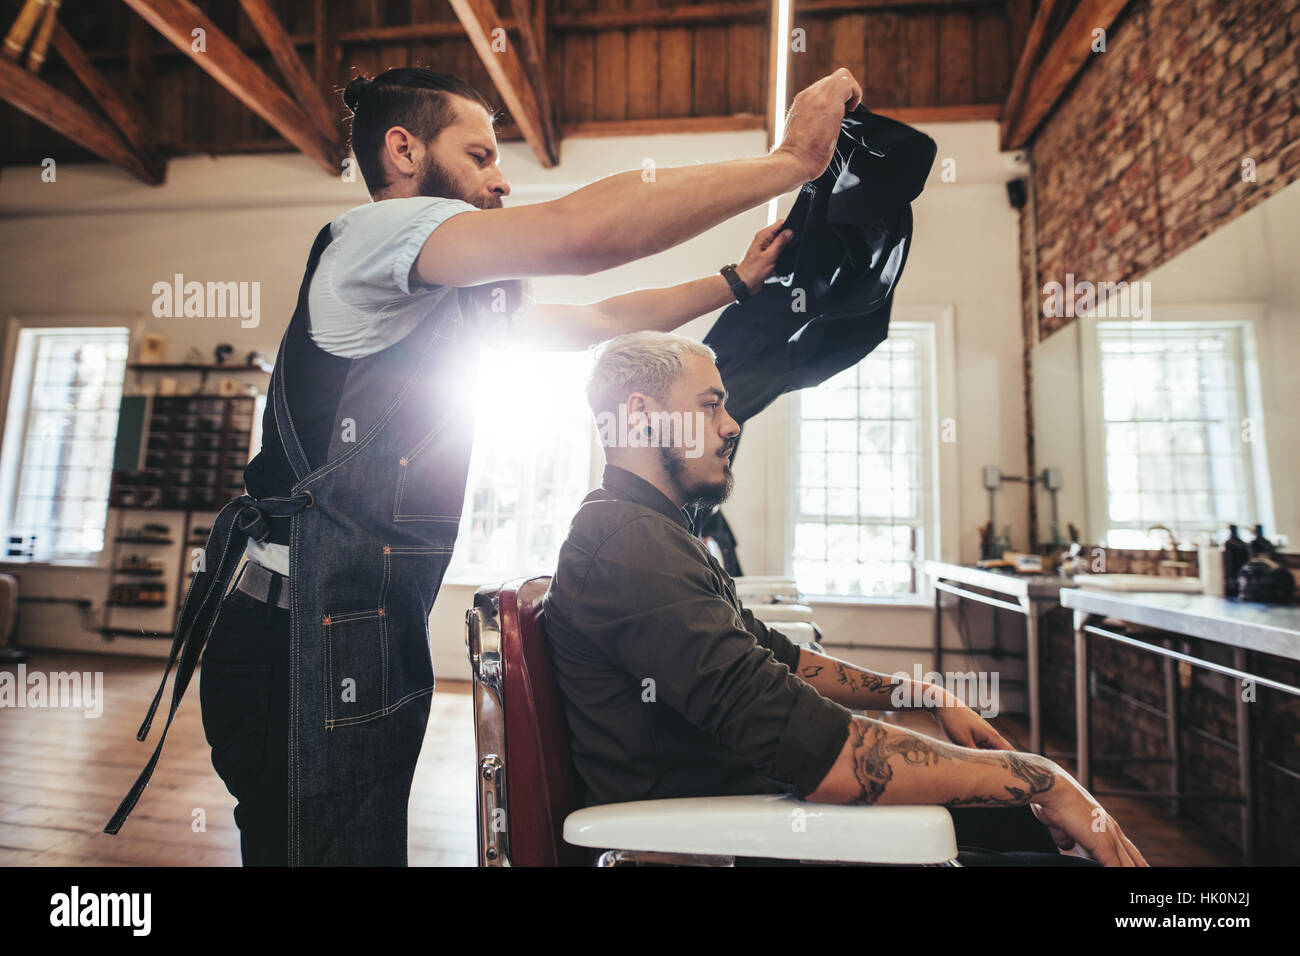 Hairstylist putting salon cape to customer before haircut. Male hairdresser at work with handsome man sitting on chair. Stock Photo